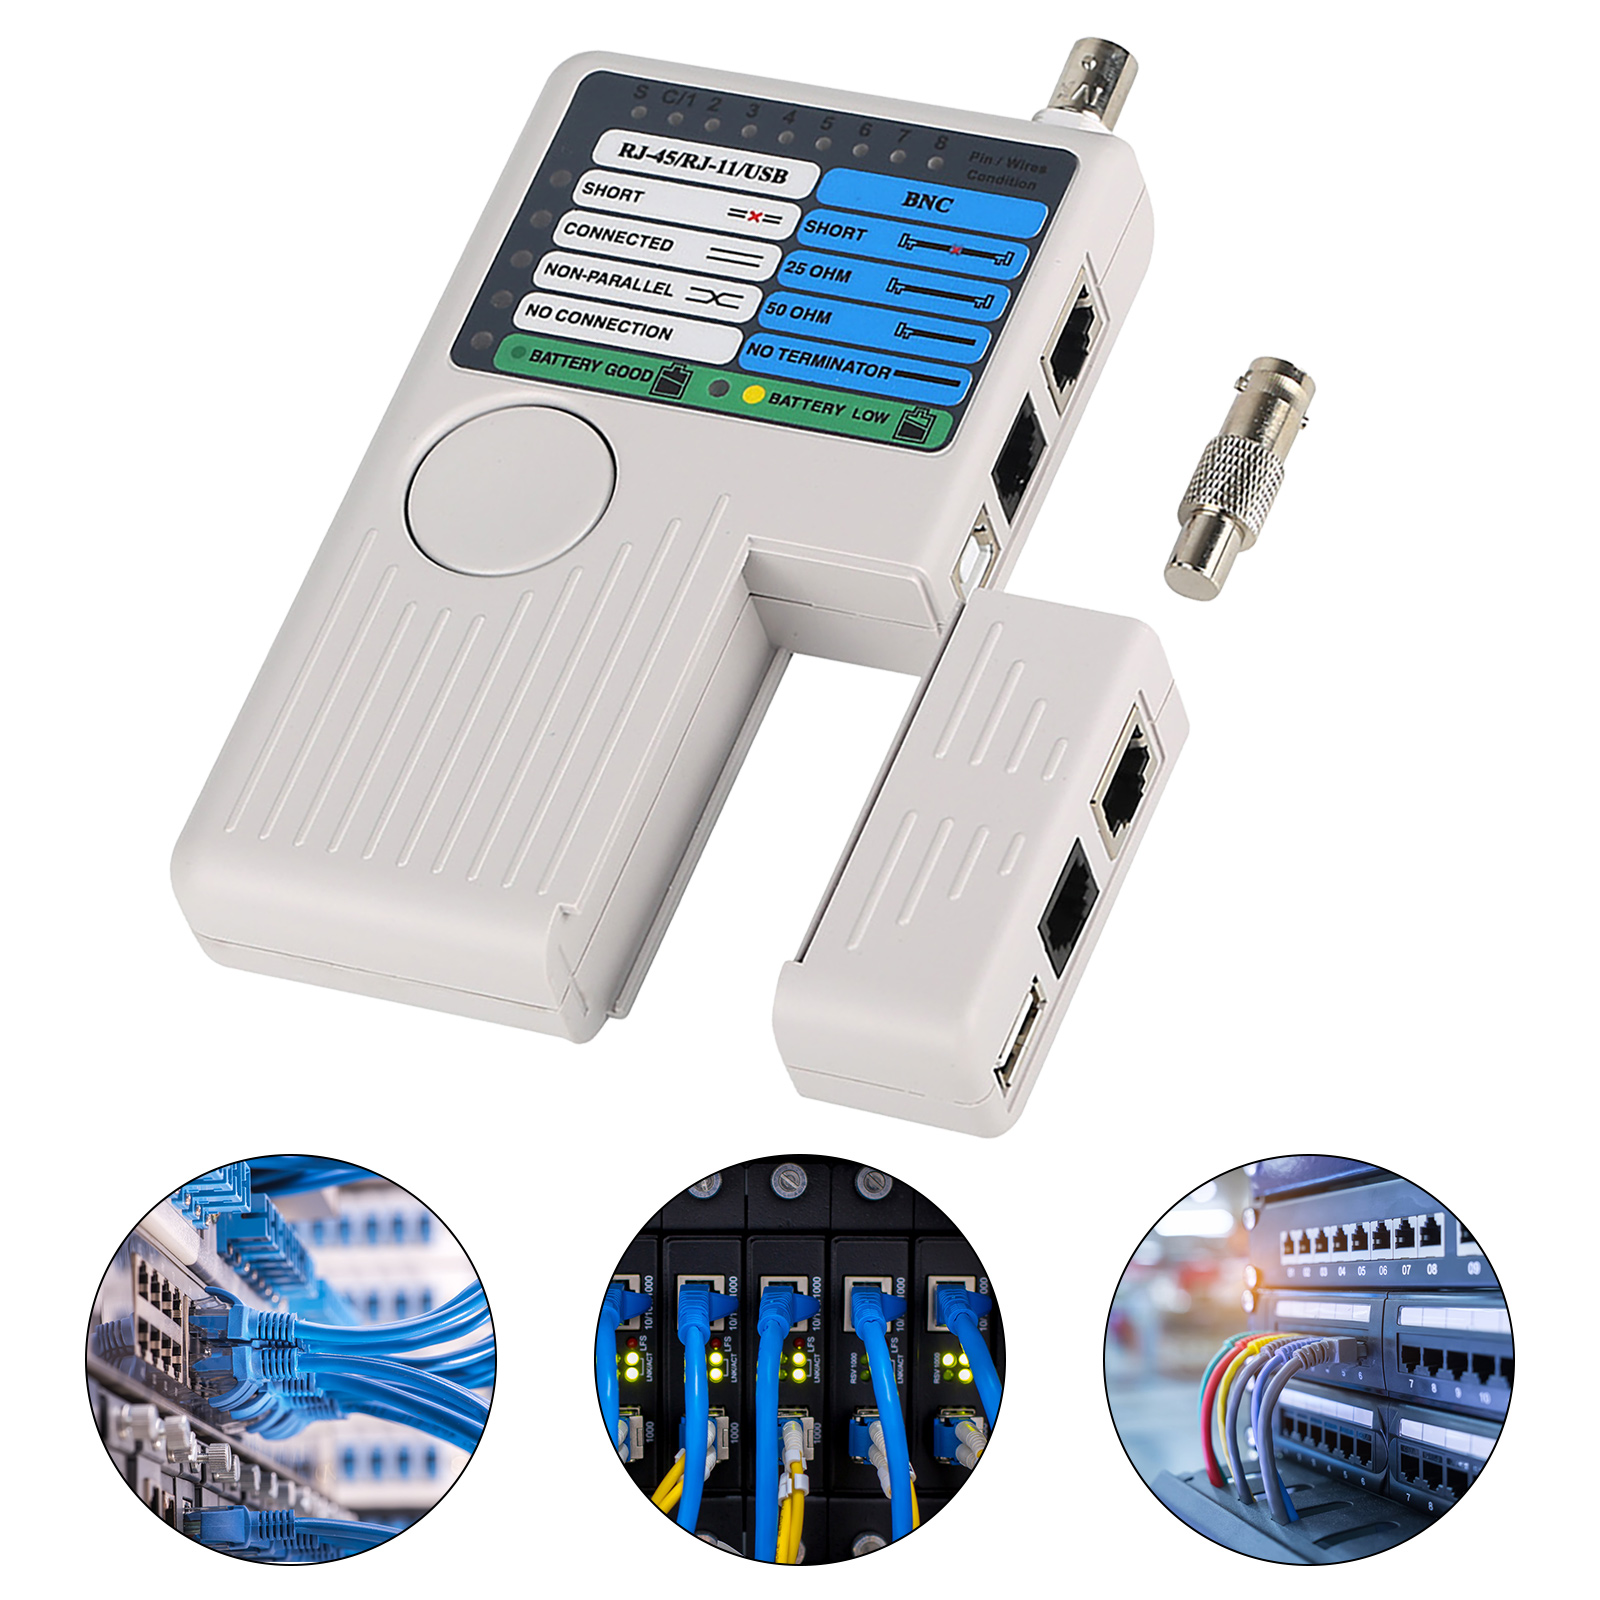 THE CIMPLE CO - Universal Network Cable Tester Tool, BNC, RJ45, RJ11, USB  (4-in-1) Multi-Tester 